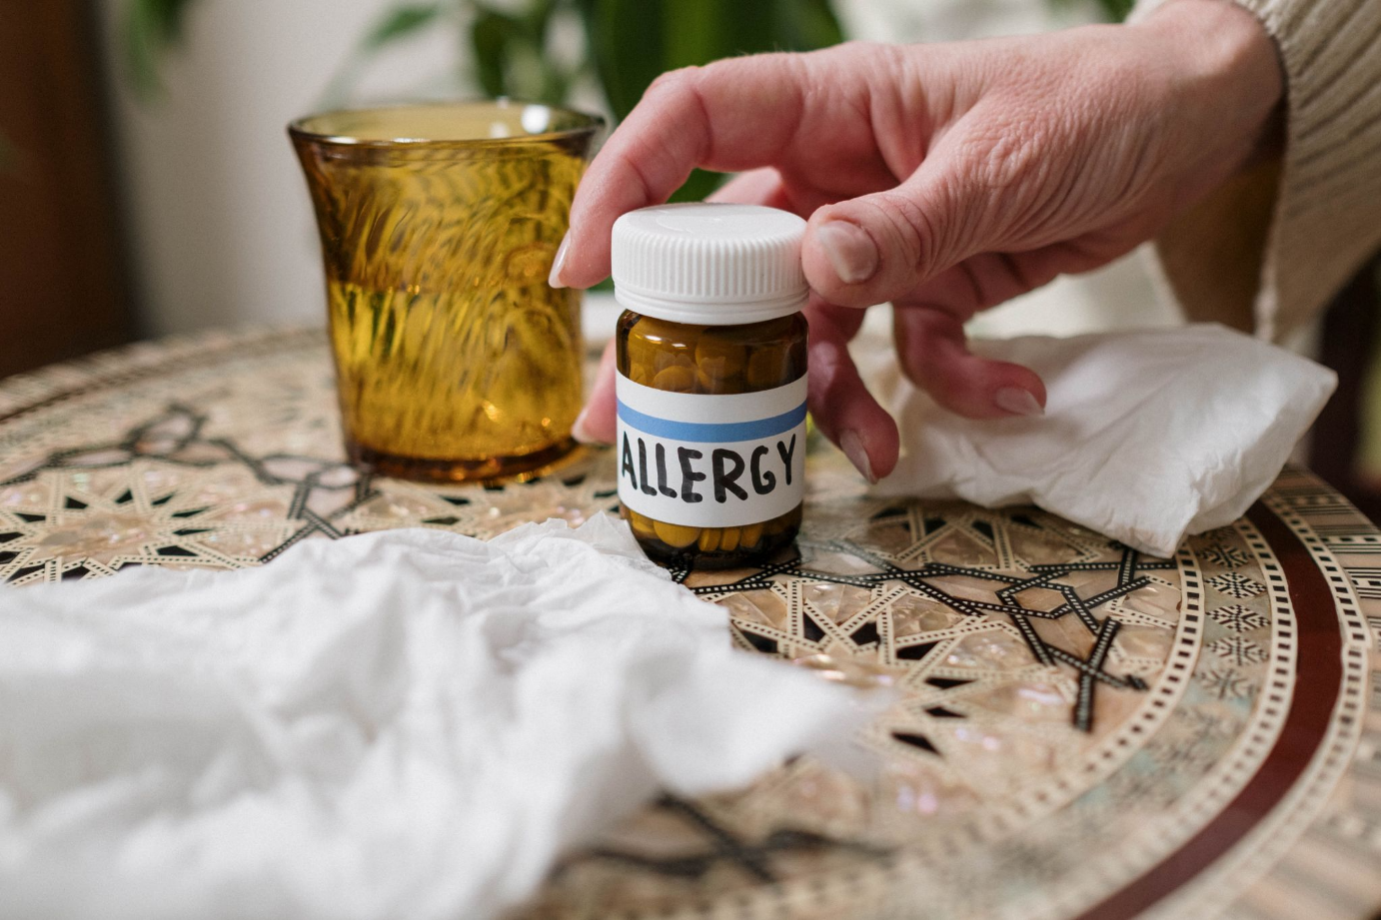  picture of allergy medication bottle on the table